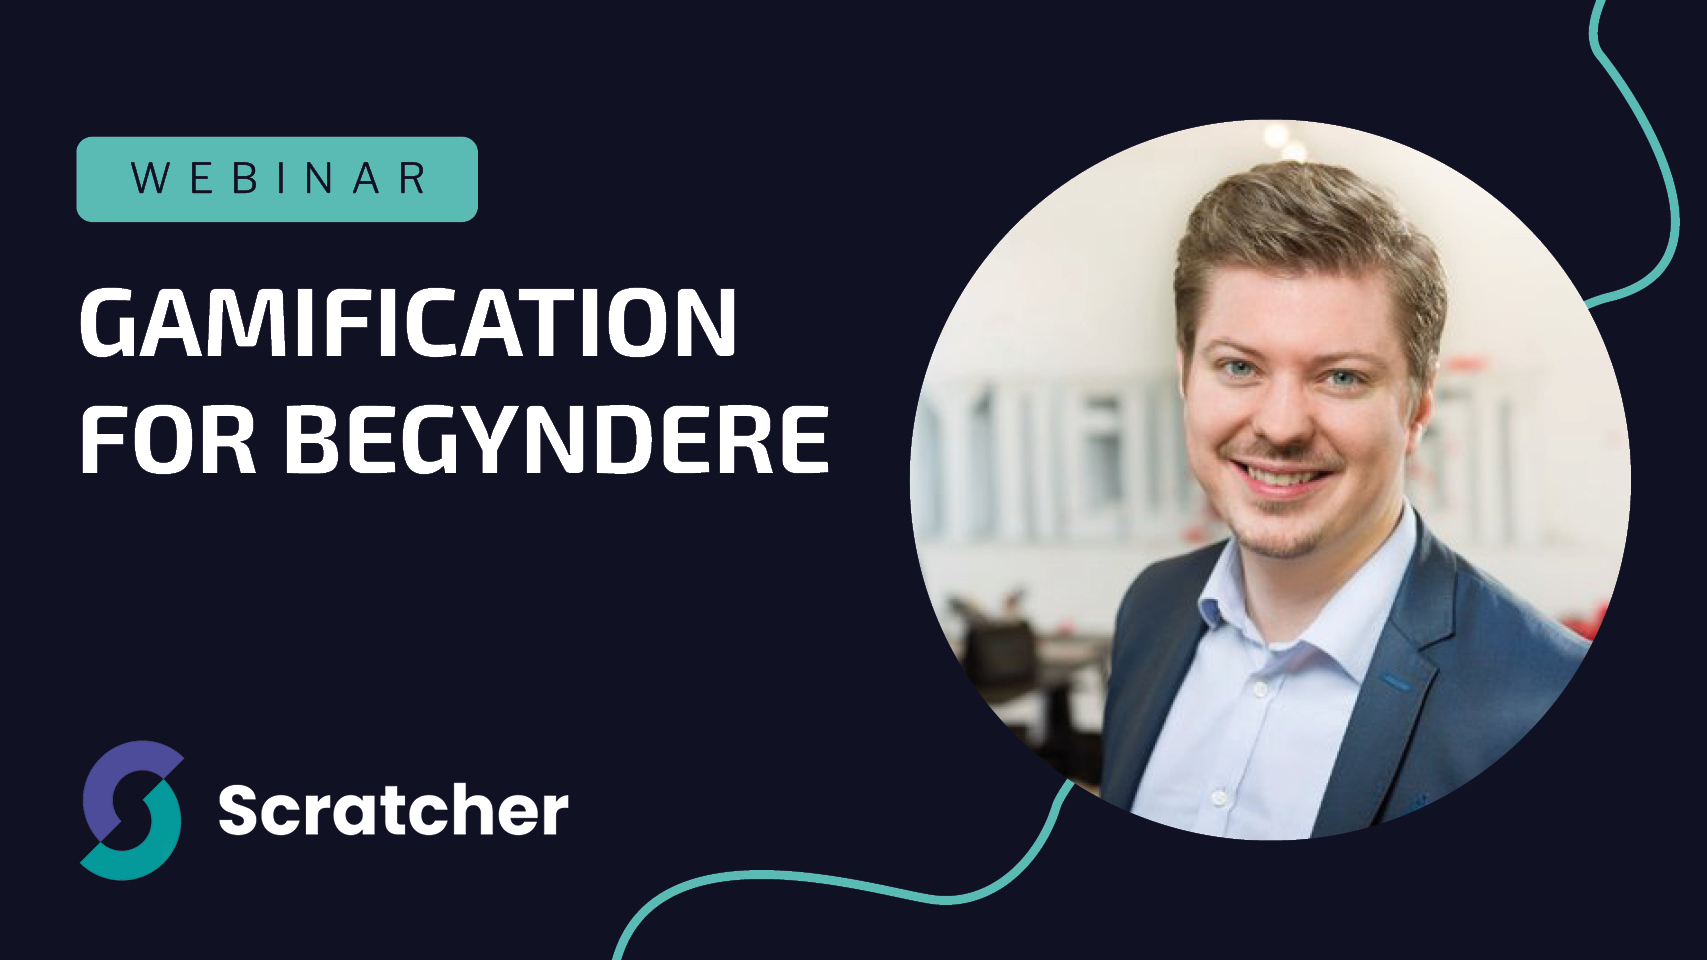 Gamification for begyndere